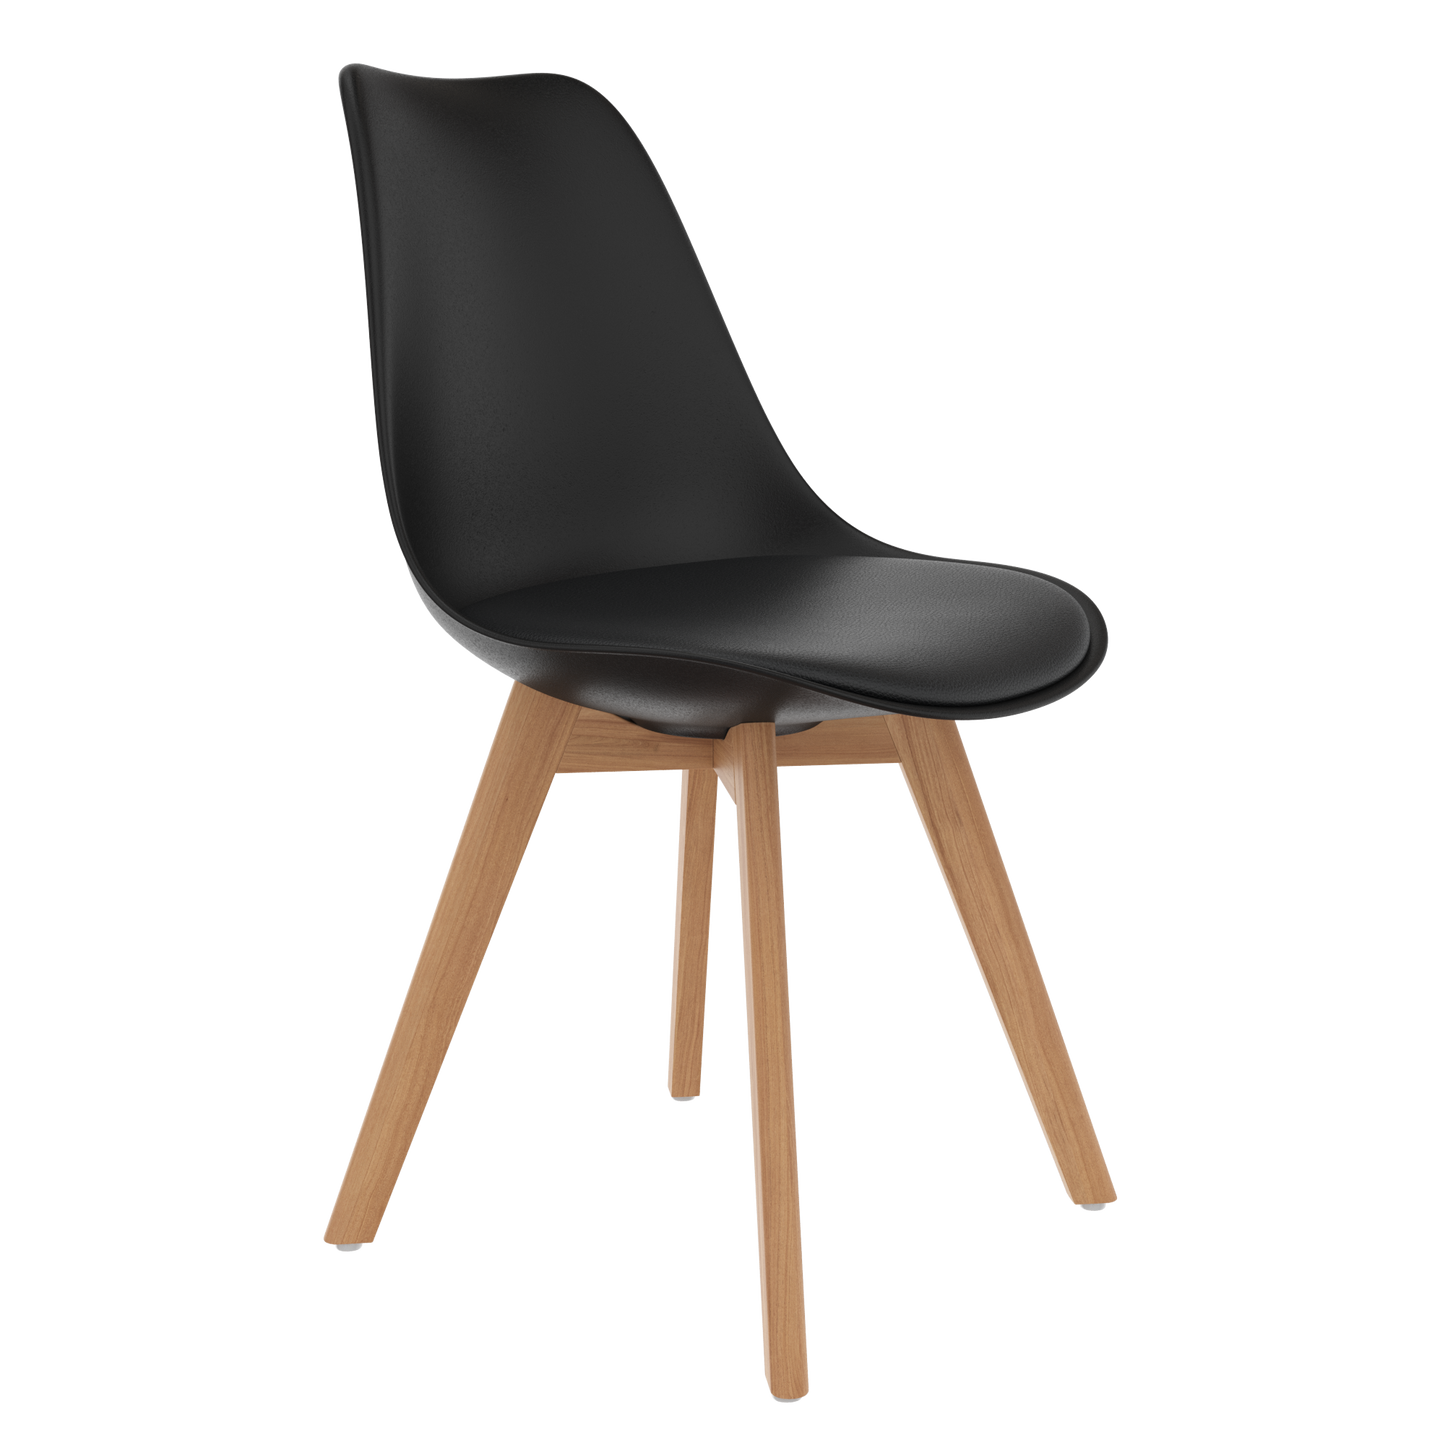 Chotto - Ando Dining Chairs - Black ( set of 6)